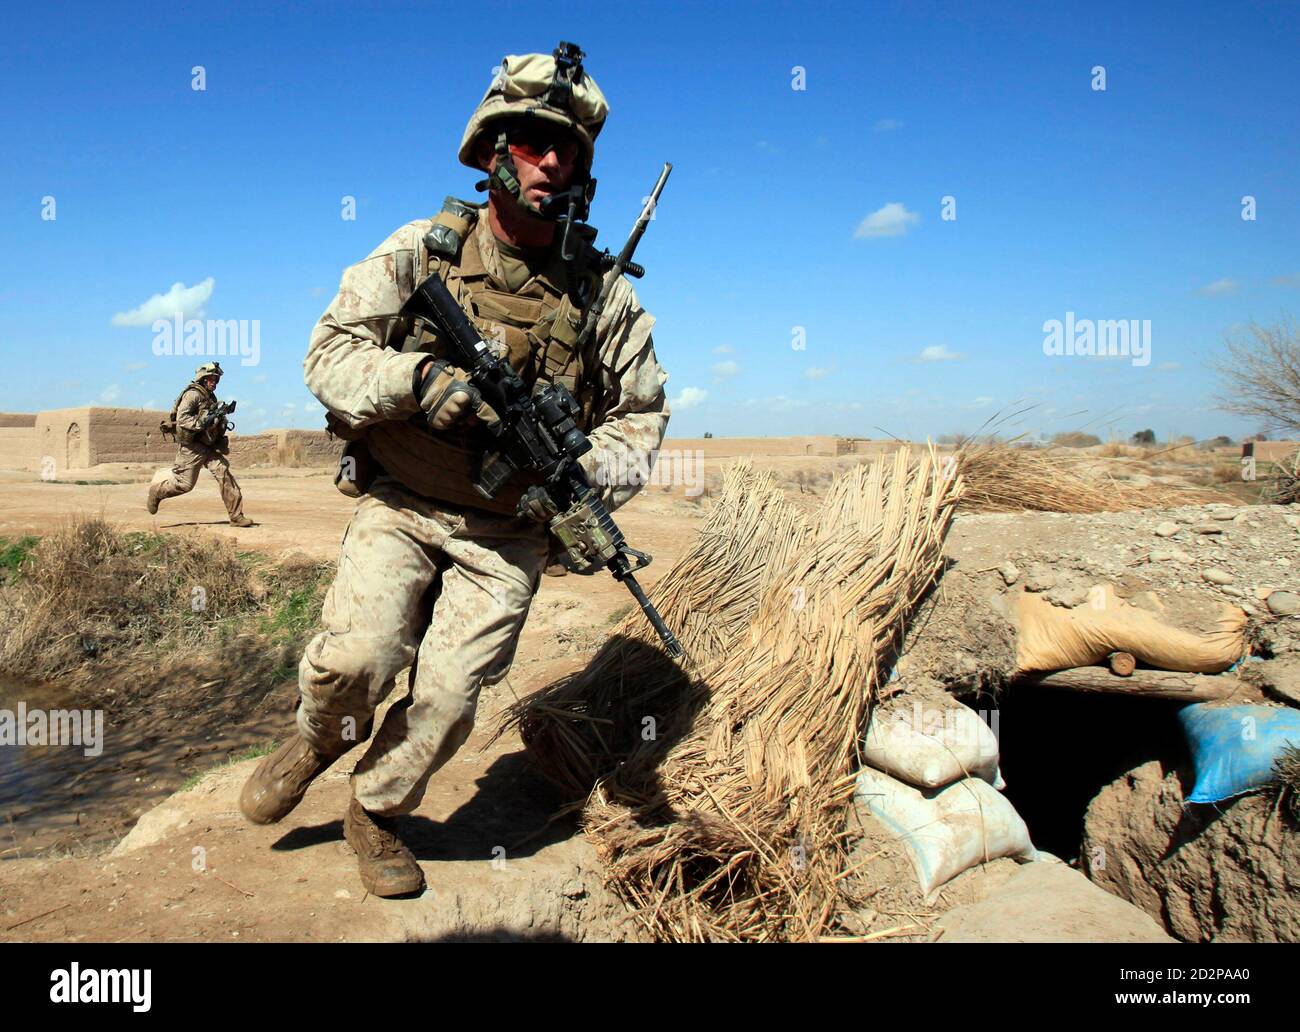 U.S. Marines from Bravo Company of the1st Battalion, 6th Marines run during a battle in Marjah, Helmand province February 22, 2010.   REUTERS/Goran Tomasevic  (AFGHANISTAN - Tags: MILITARY CONFLICT) Stock Photo